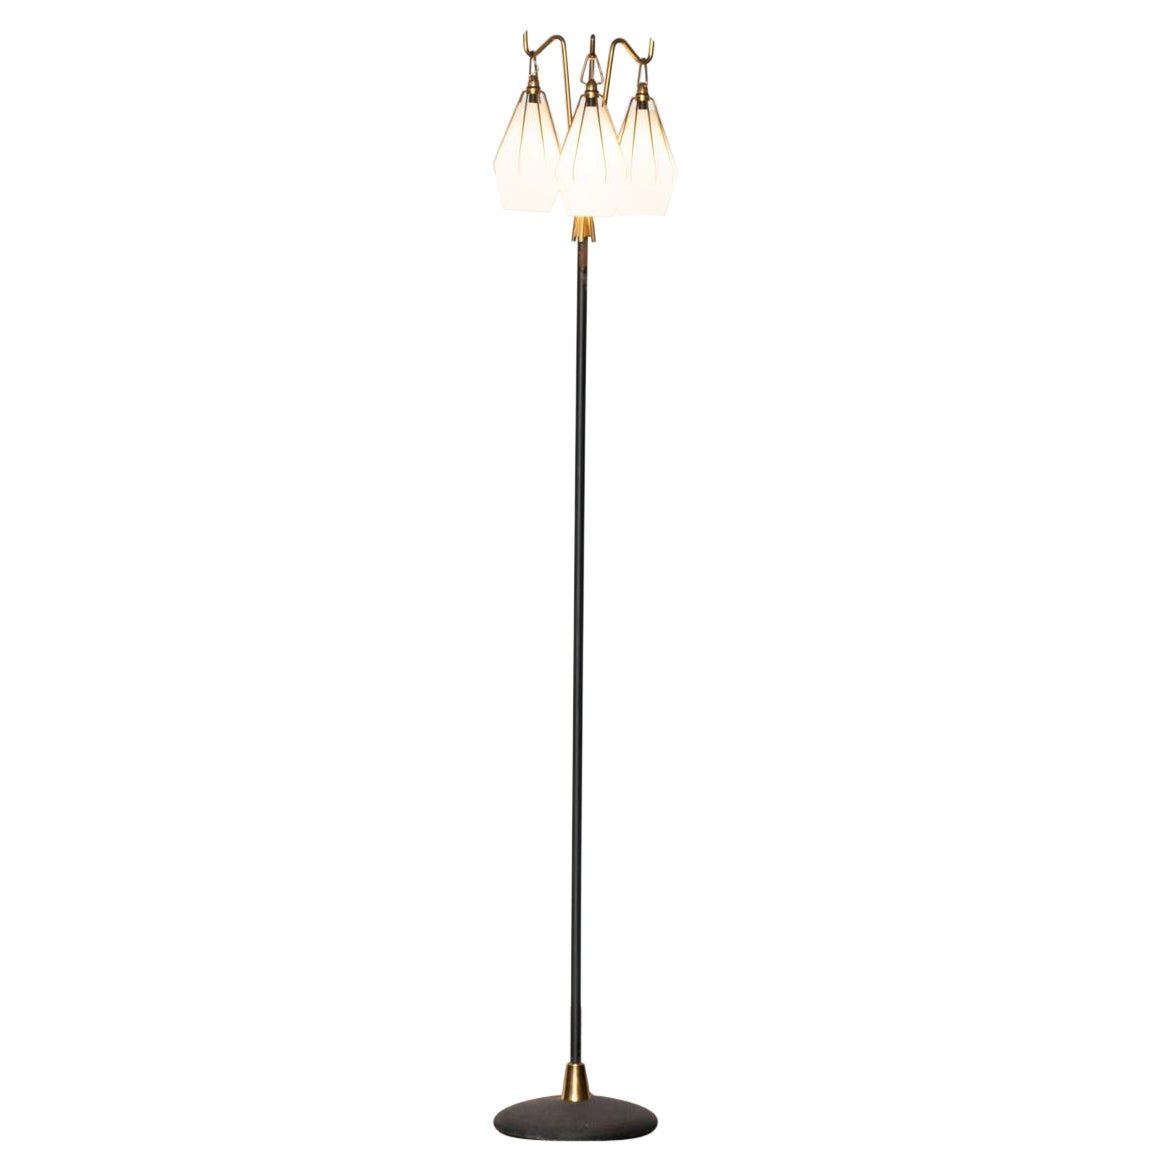 Angelo Lelii Floor Lamp with Three Glass Elements Arredoluce, 1950 For Sale